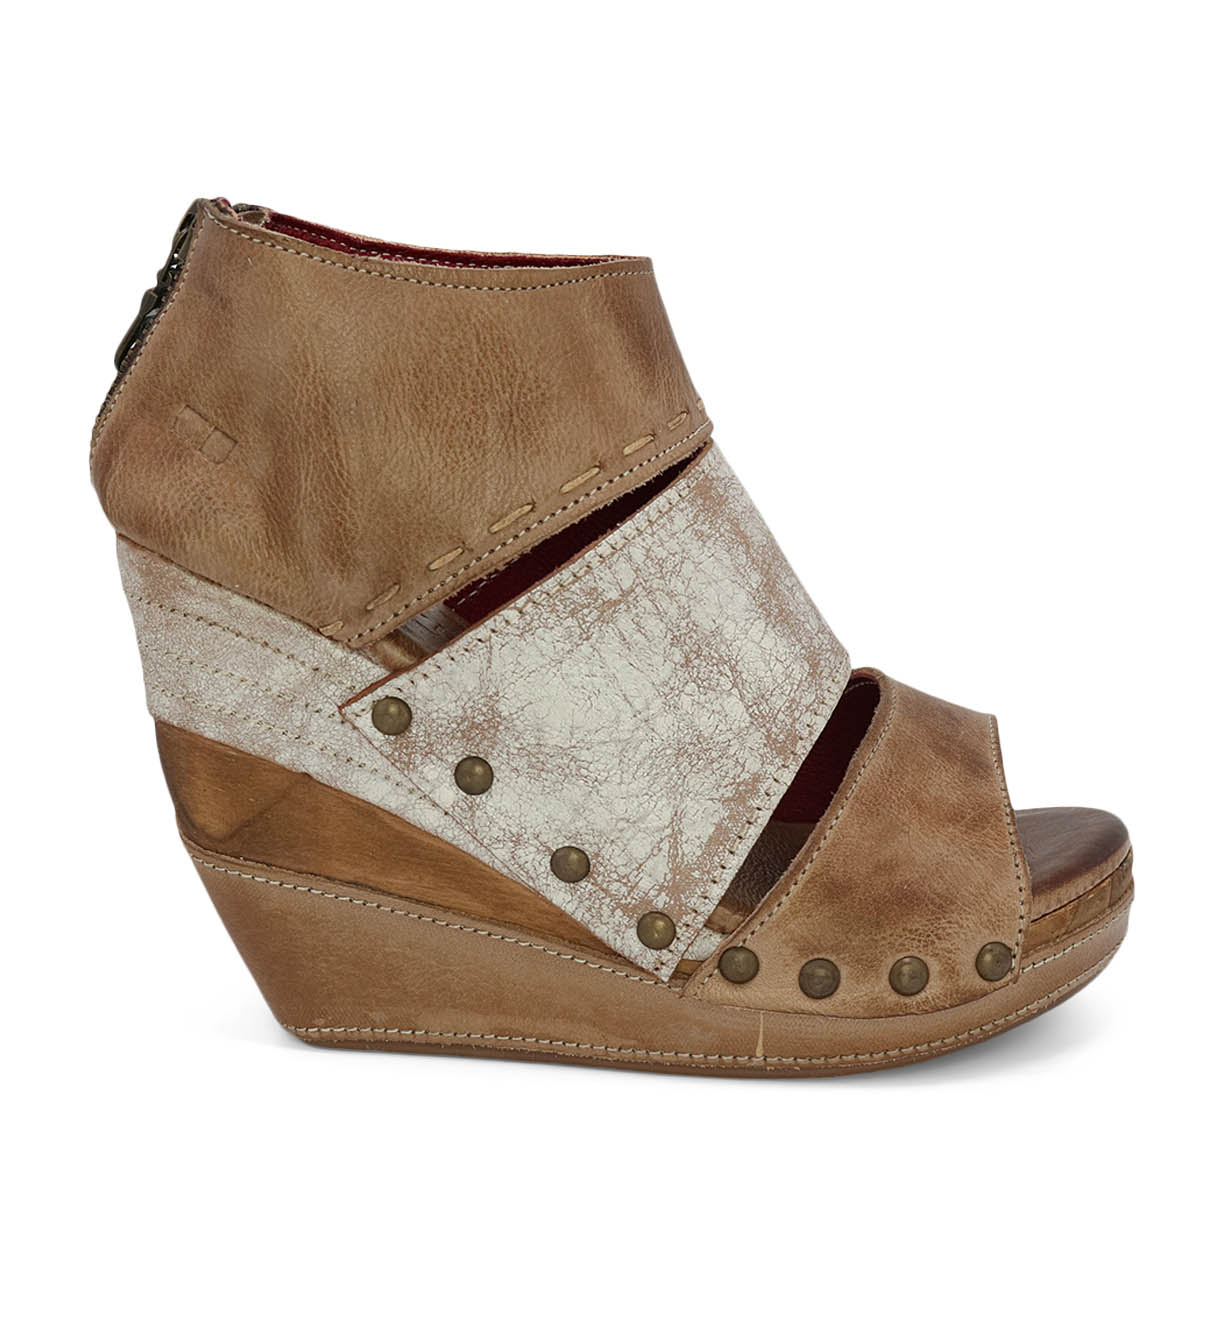 A women's Jessie wedge sandal with tan and white straps by Bed Stu.